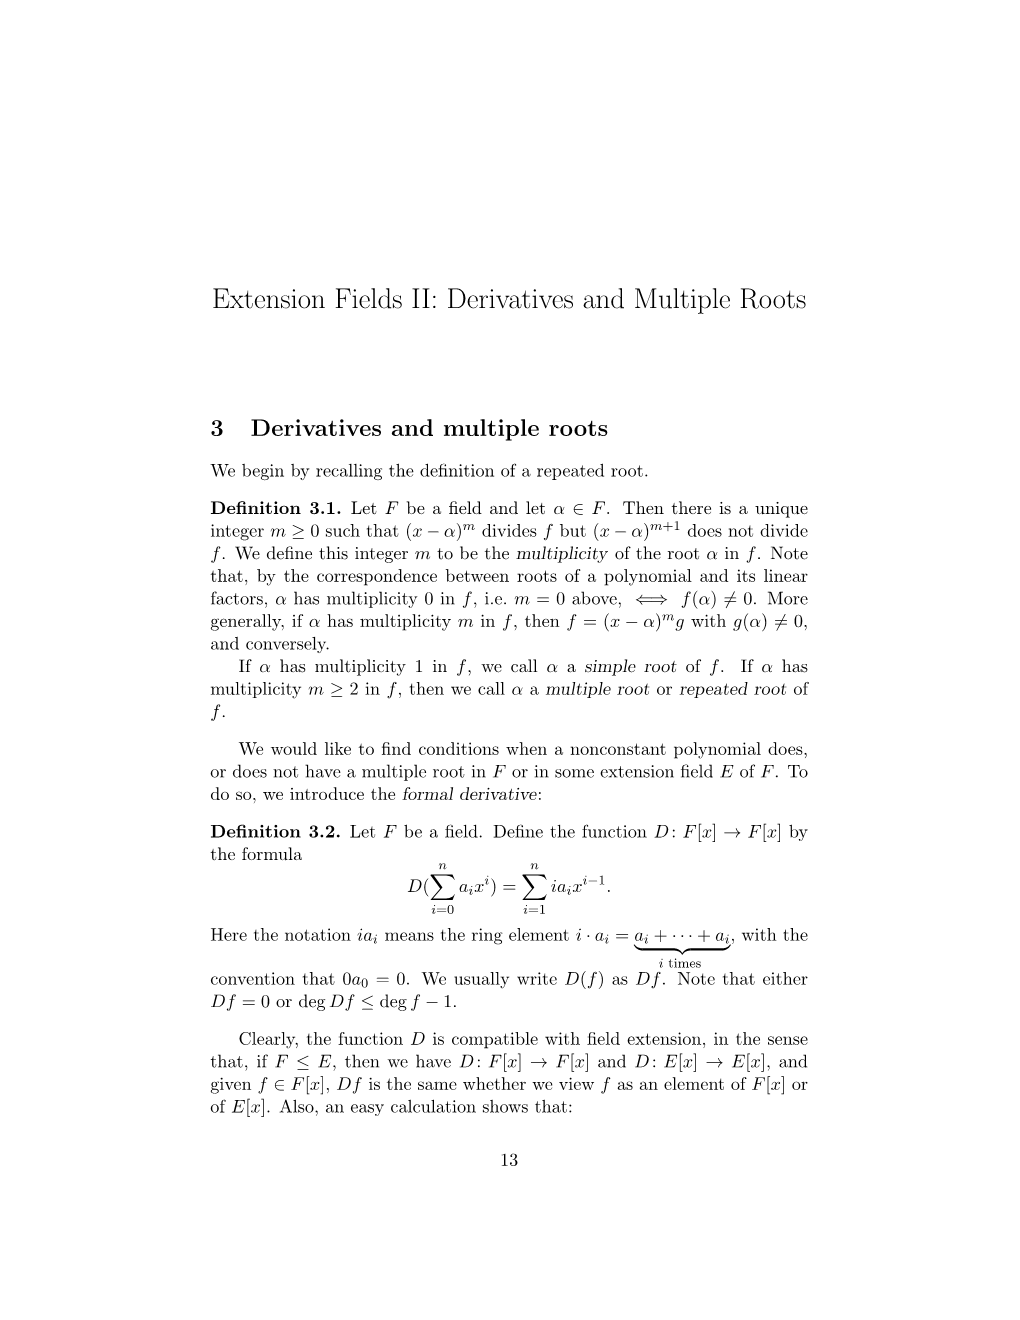 Extension Fields II: Derivatives and Multiple Roots